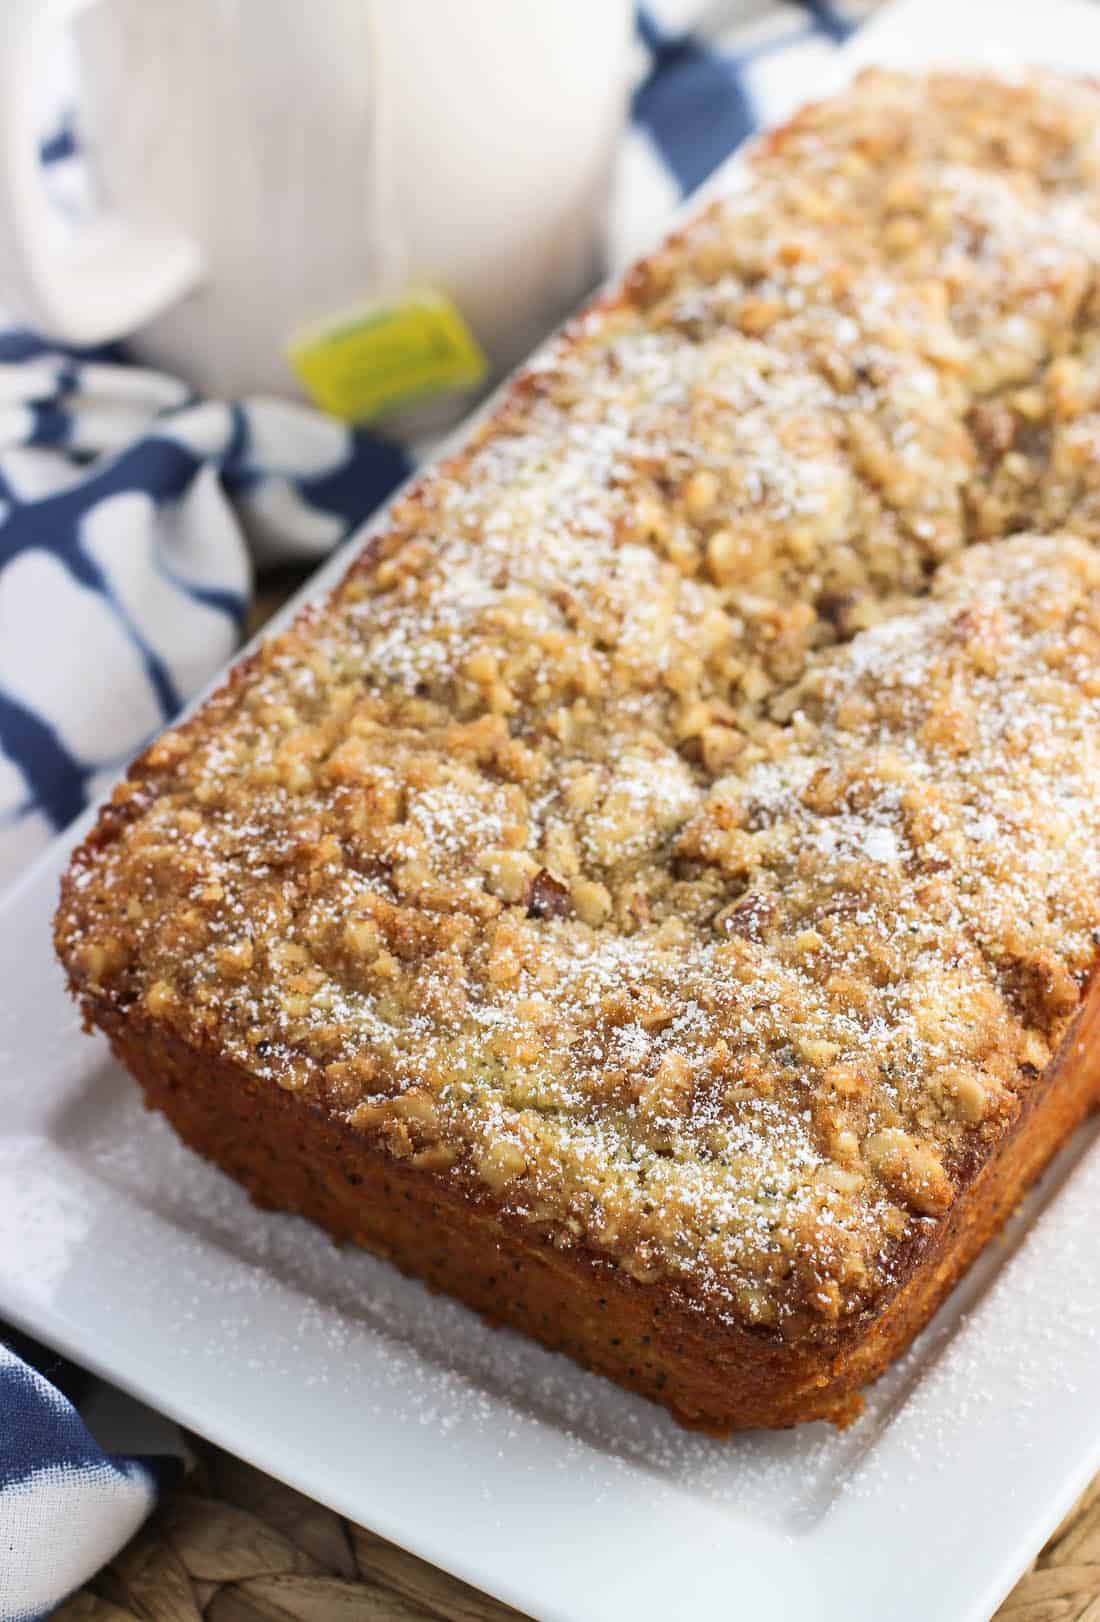 A loaf of lemon poppy seed bread topped with streusel and dusted with confectioners' sugar